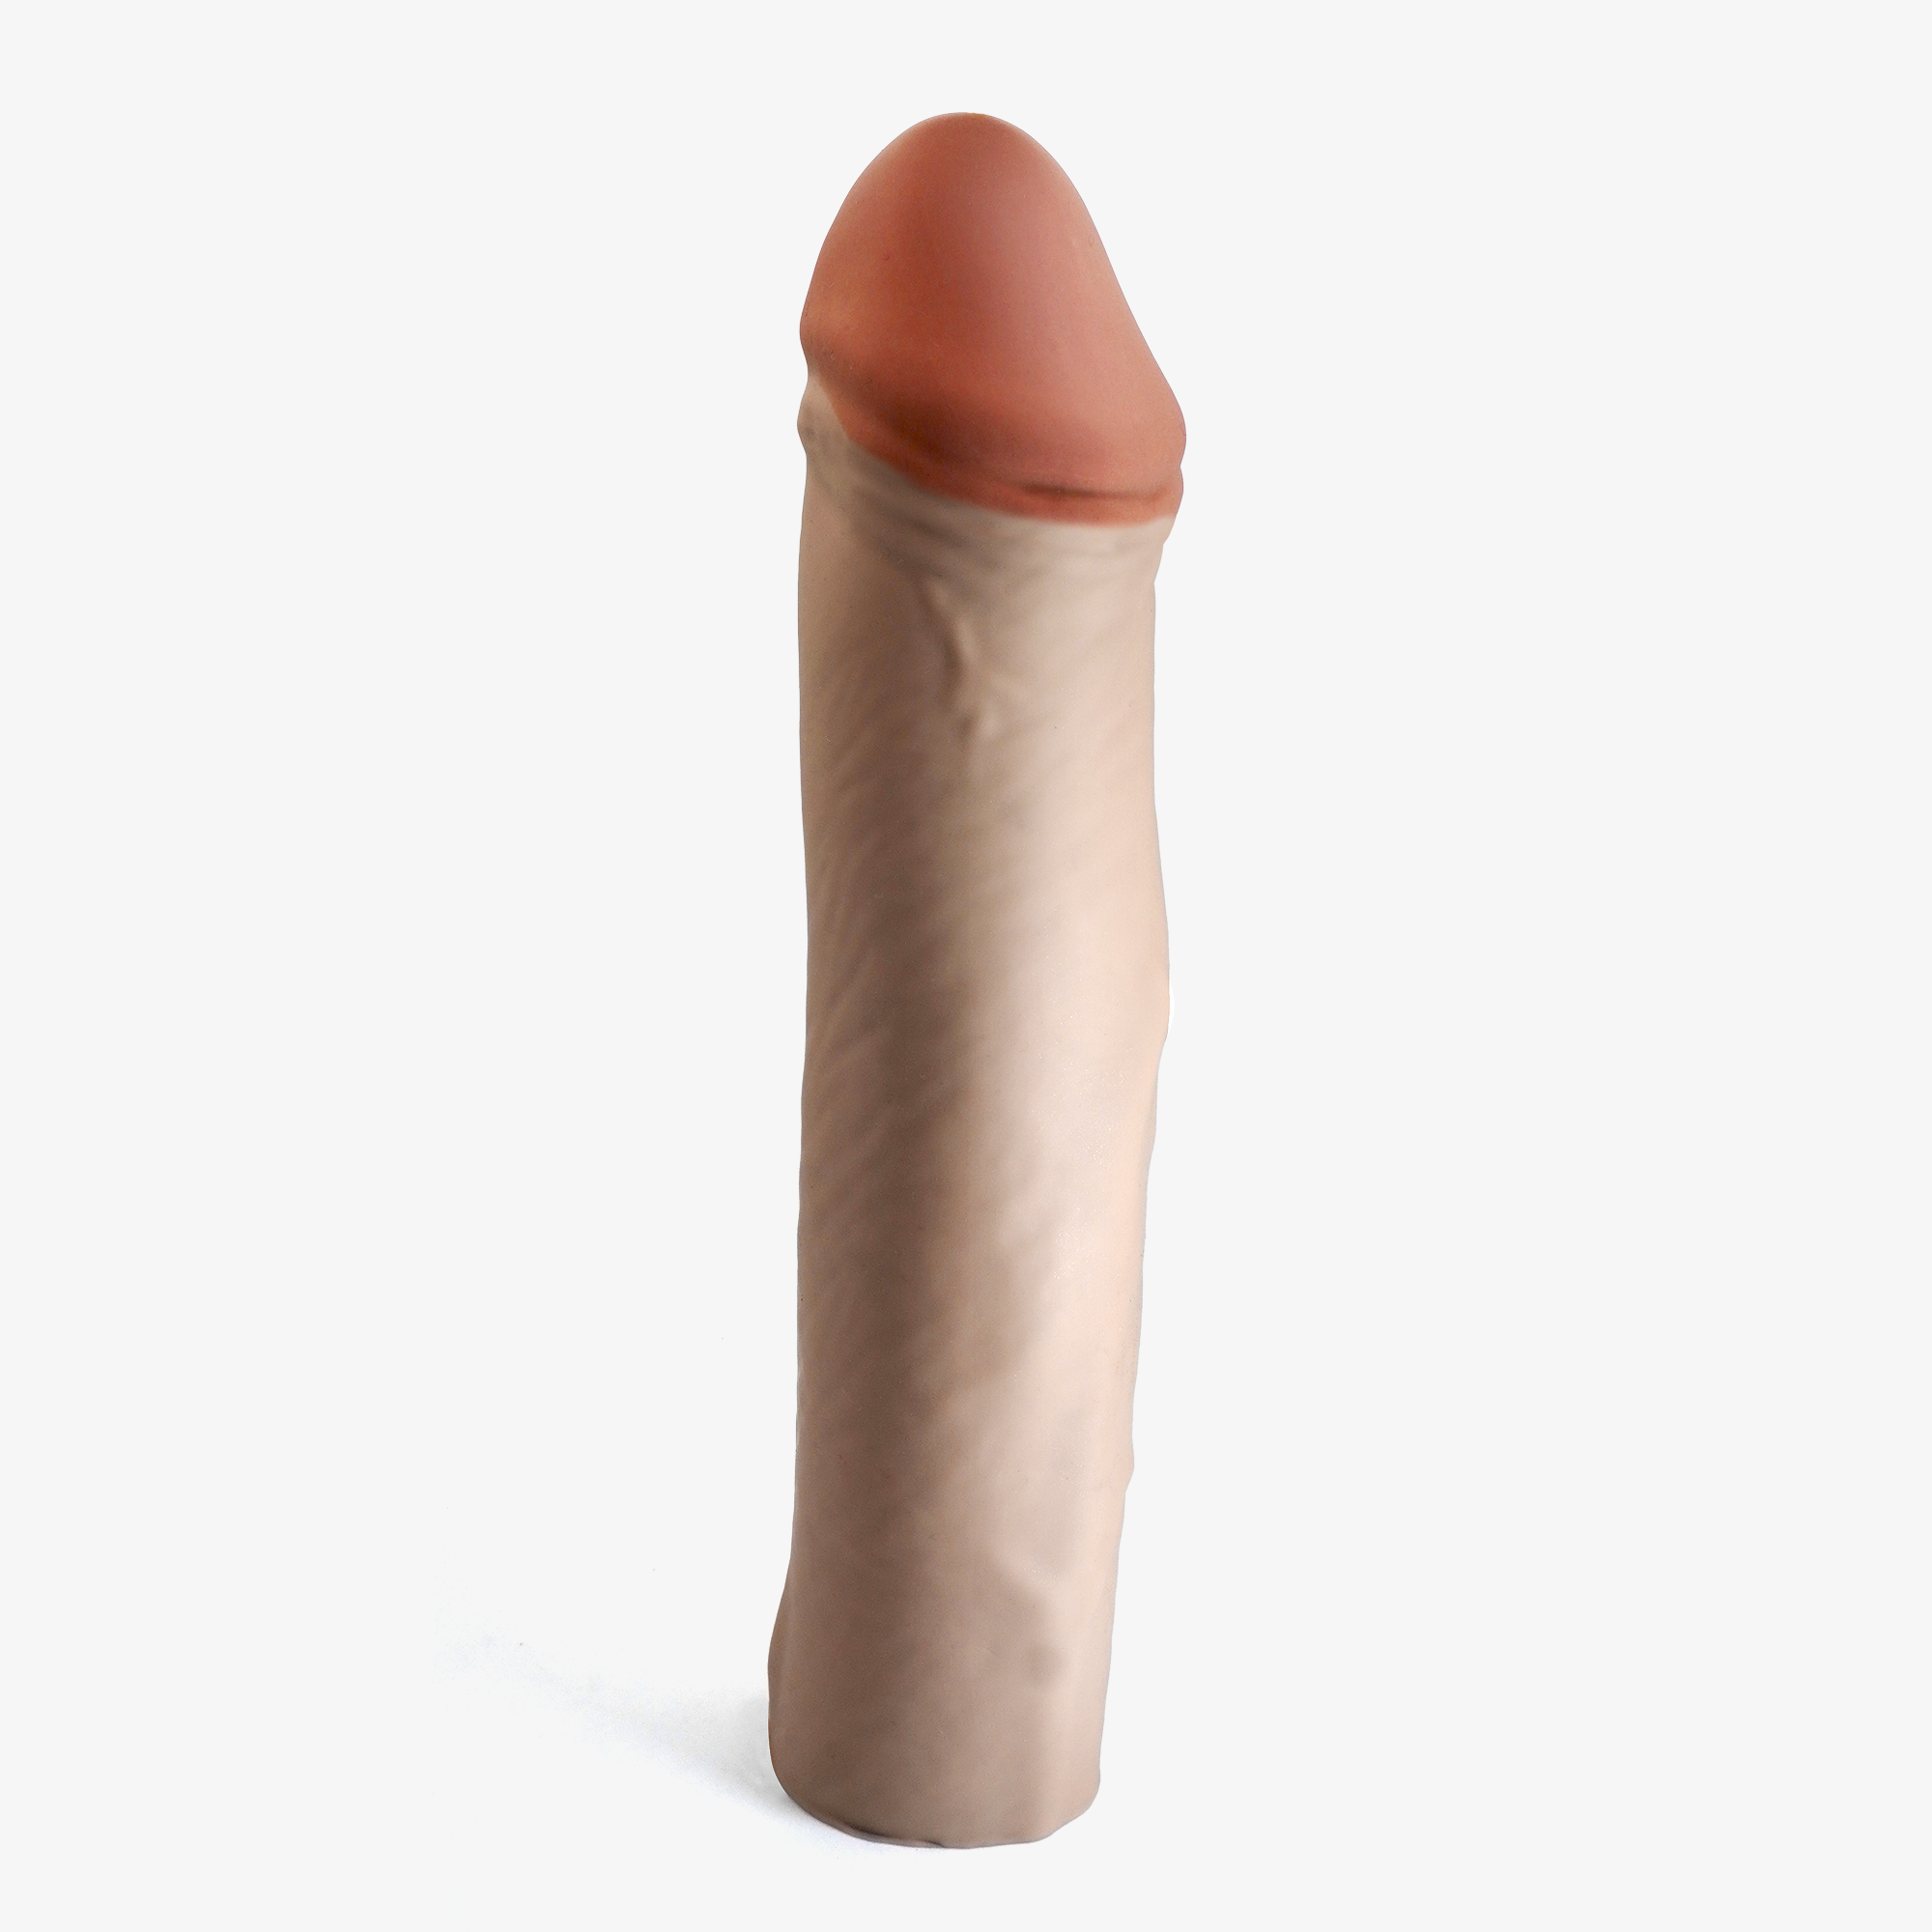 The Made To Measure Slim Penis Extender